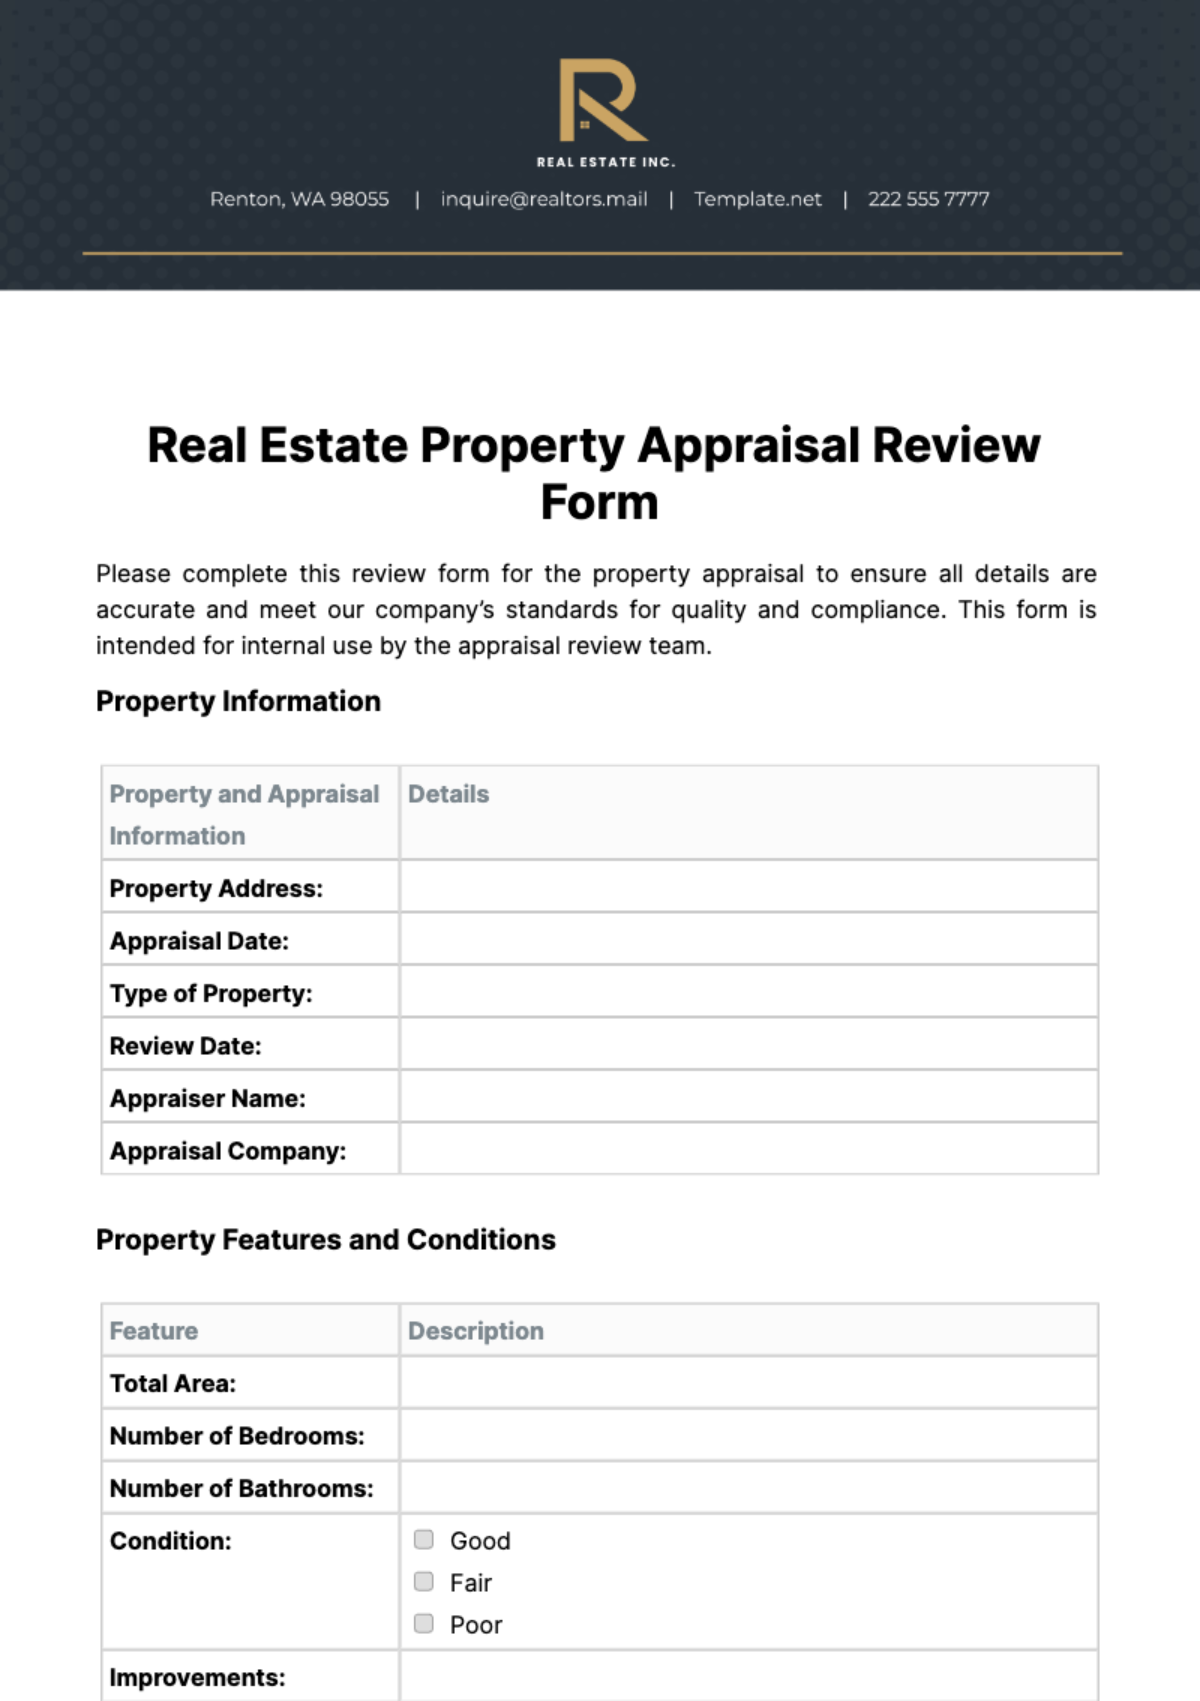 Real Estate Property Appraisal Review Form Template